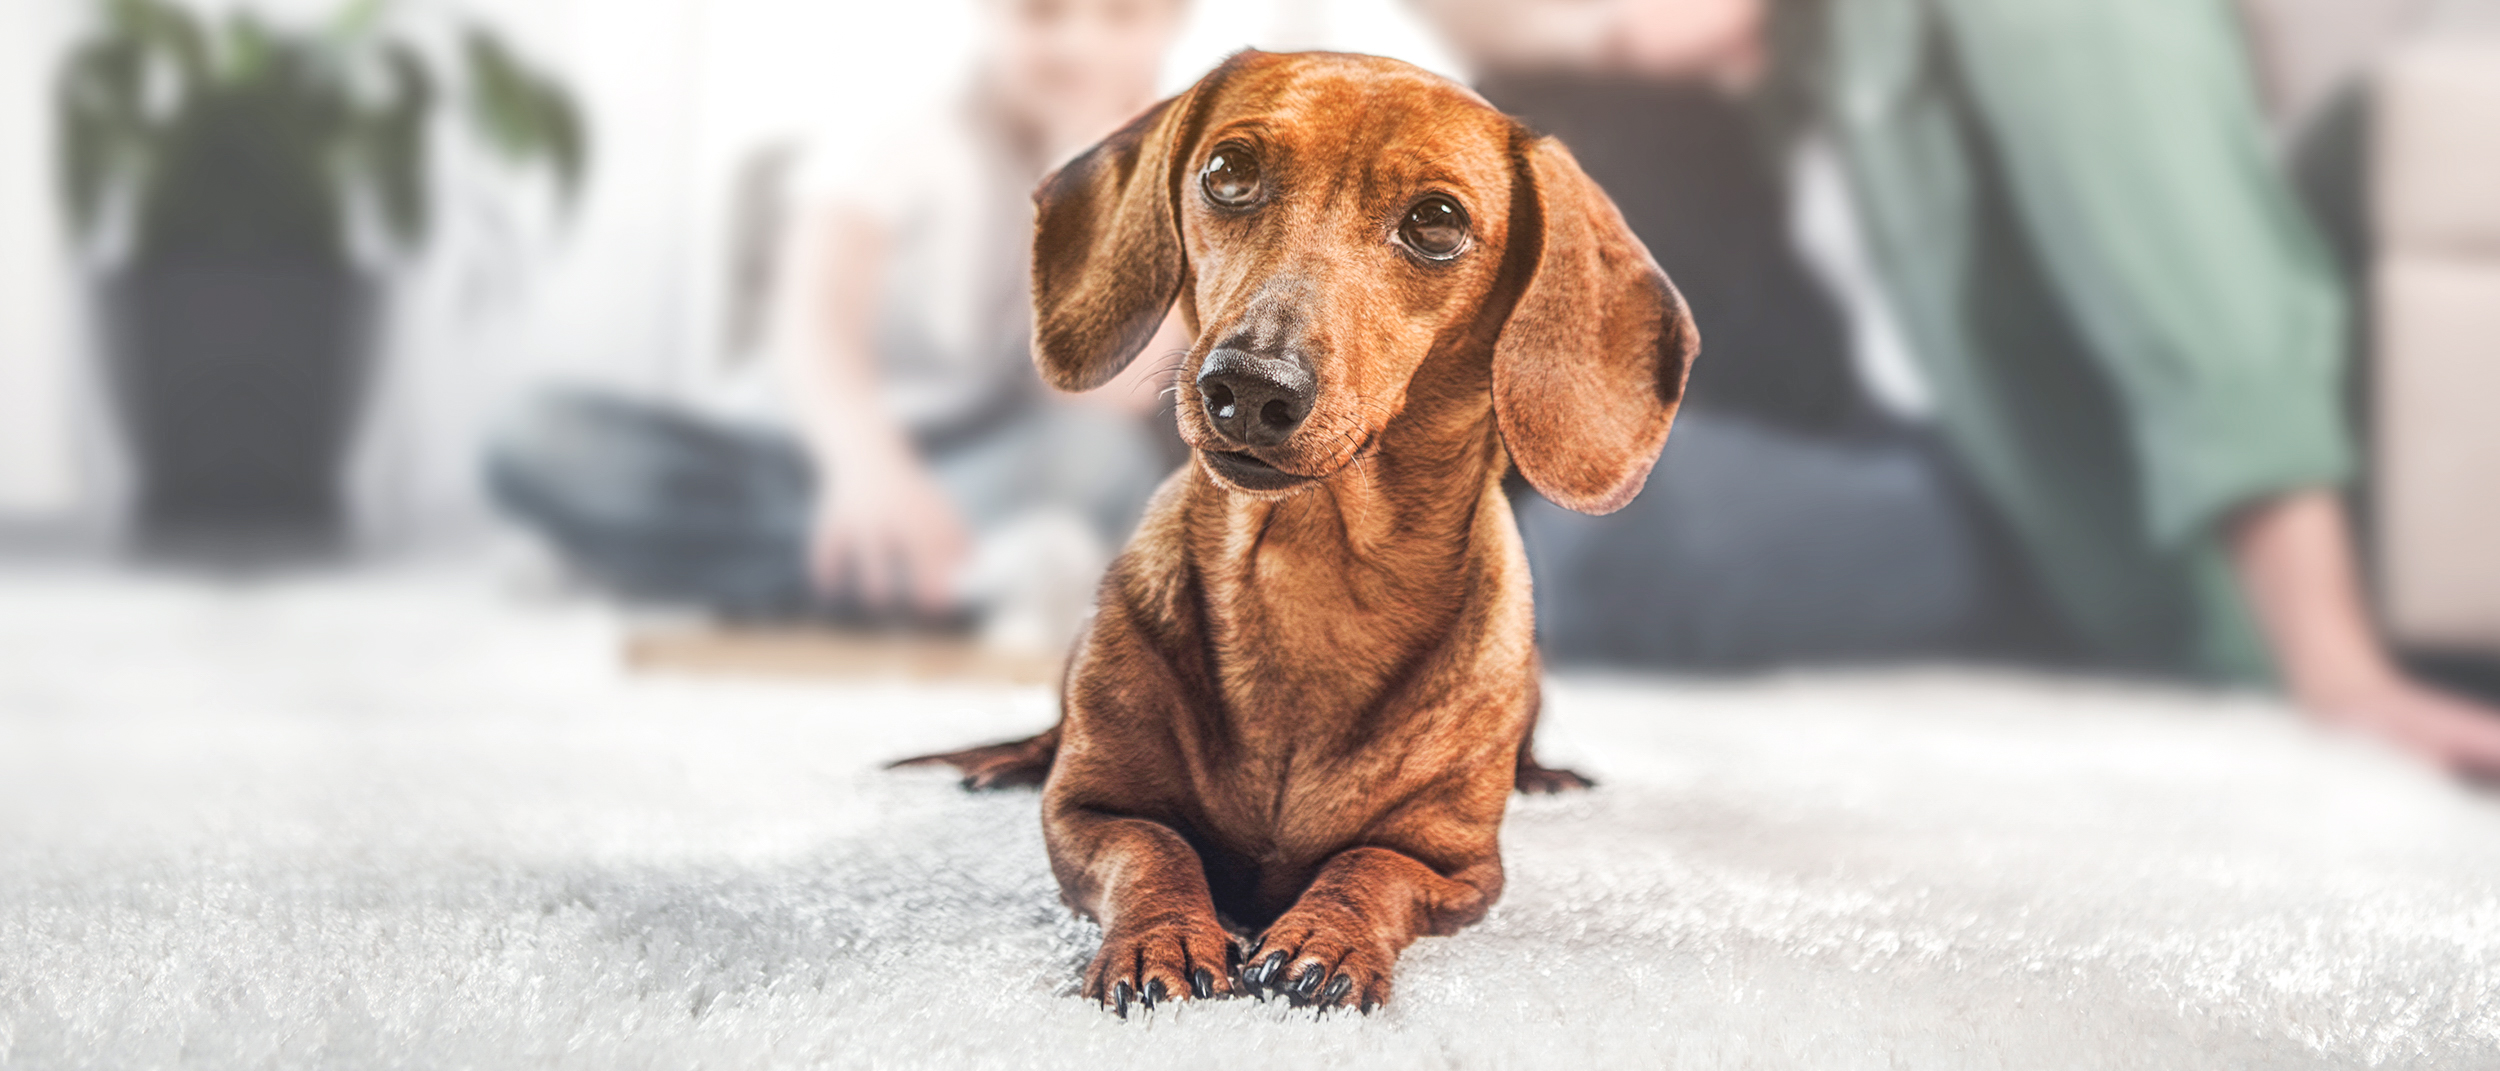 Adult Dachshund lying down in a living room with people behind.